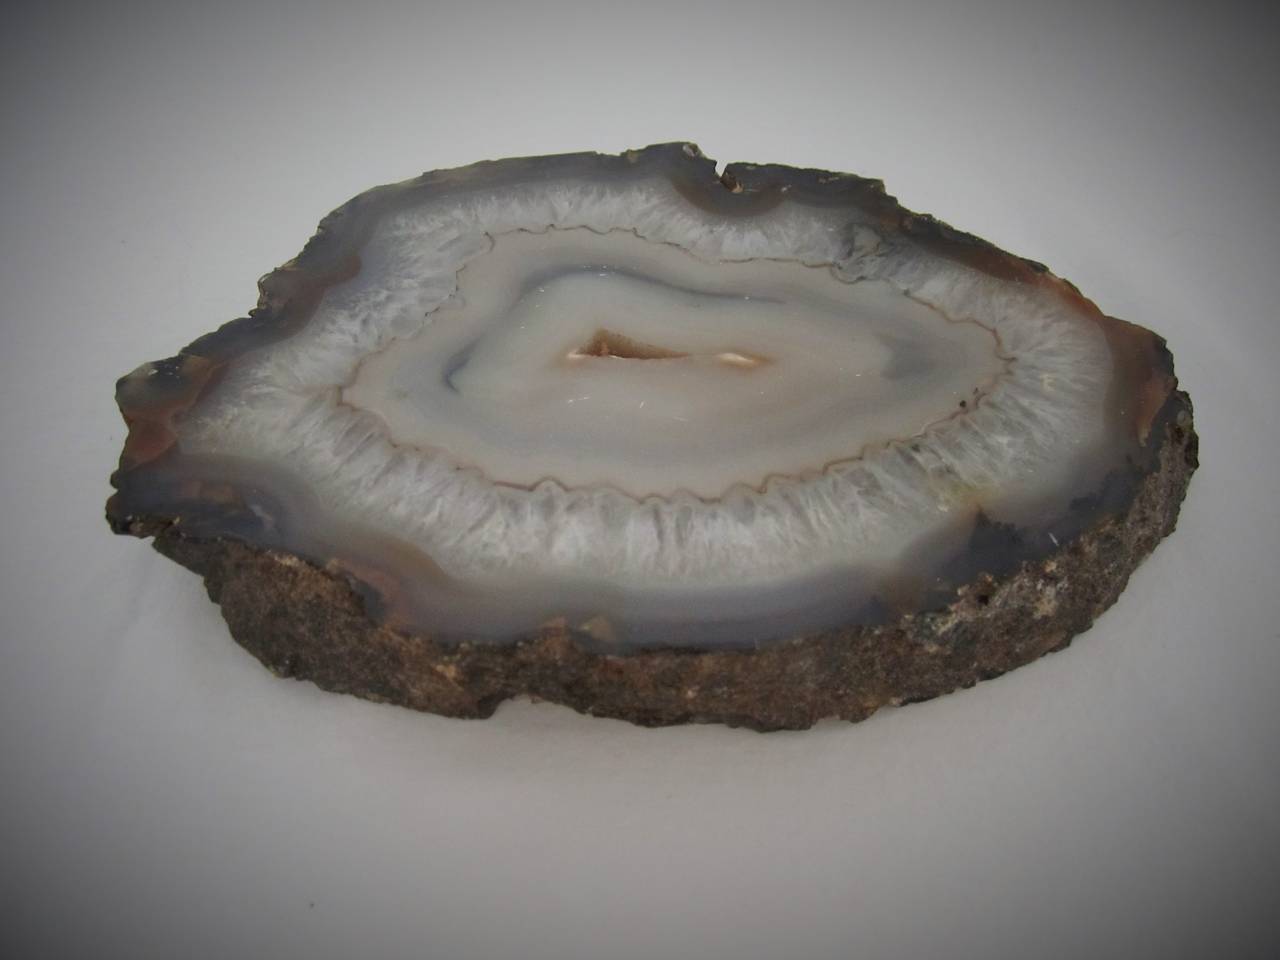 Polished Grey Agate Onyx Decorative Object or Display Piece For Sale